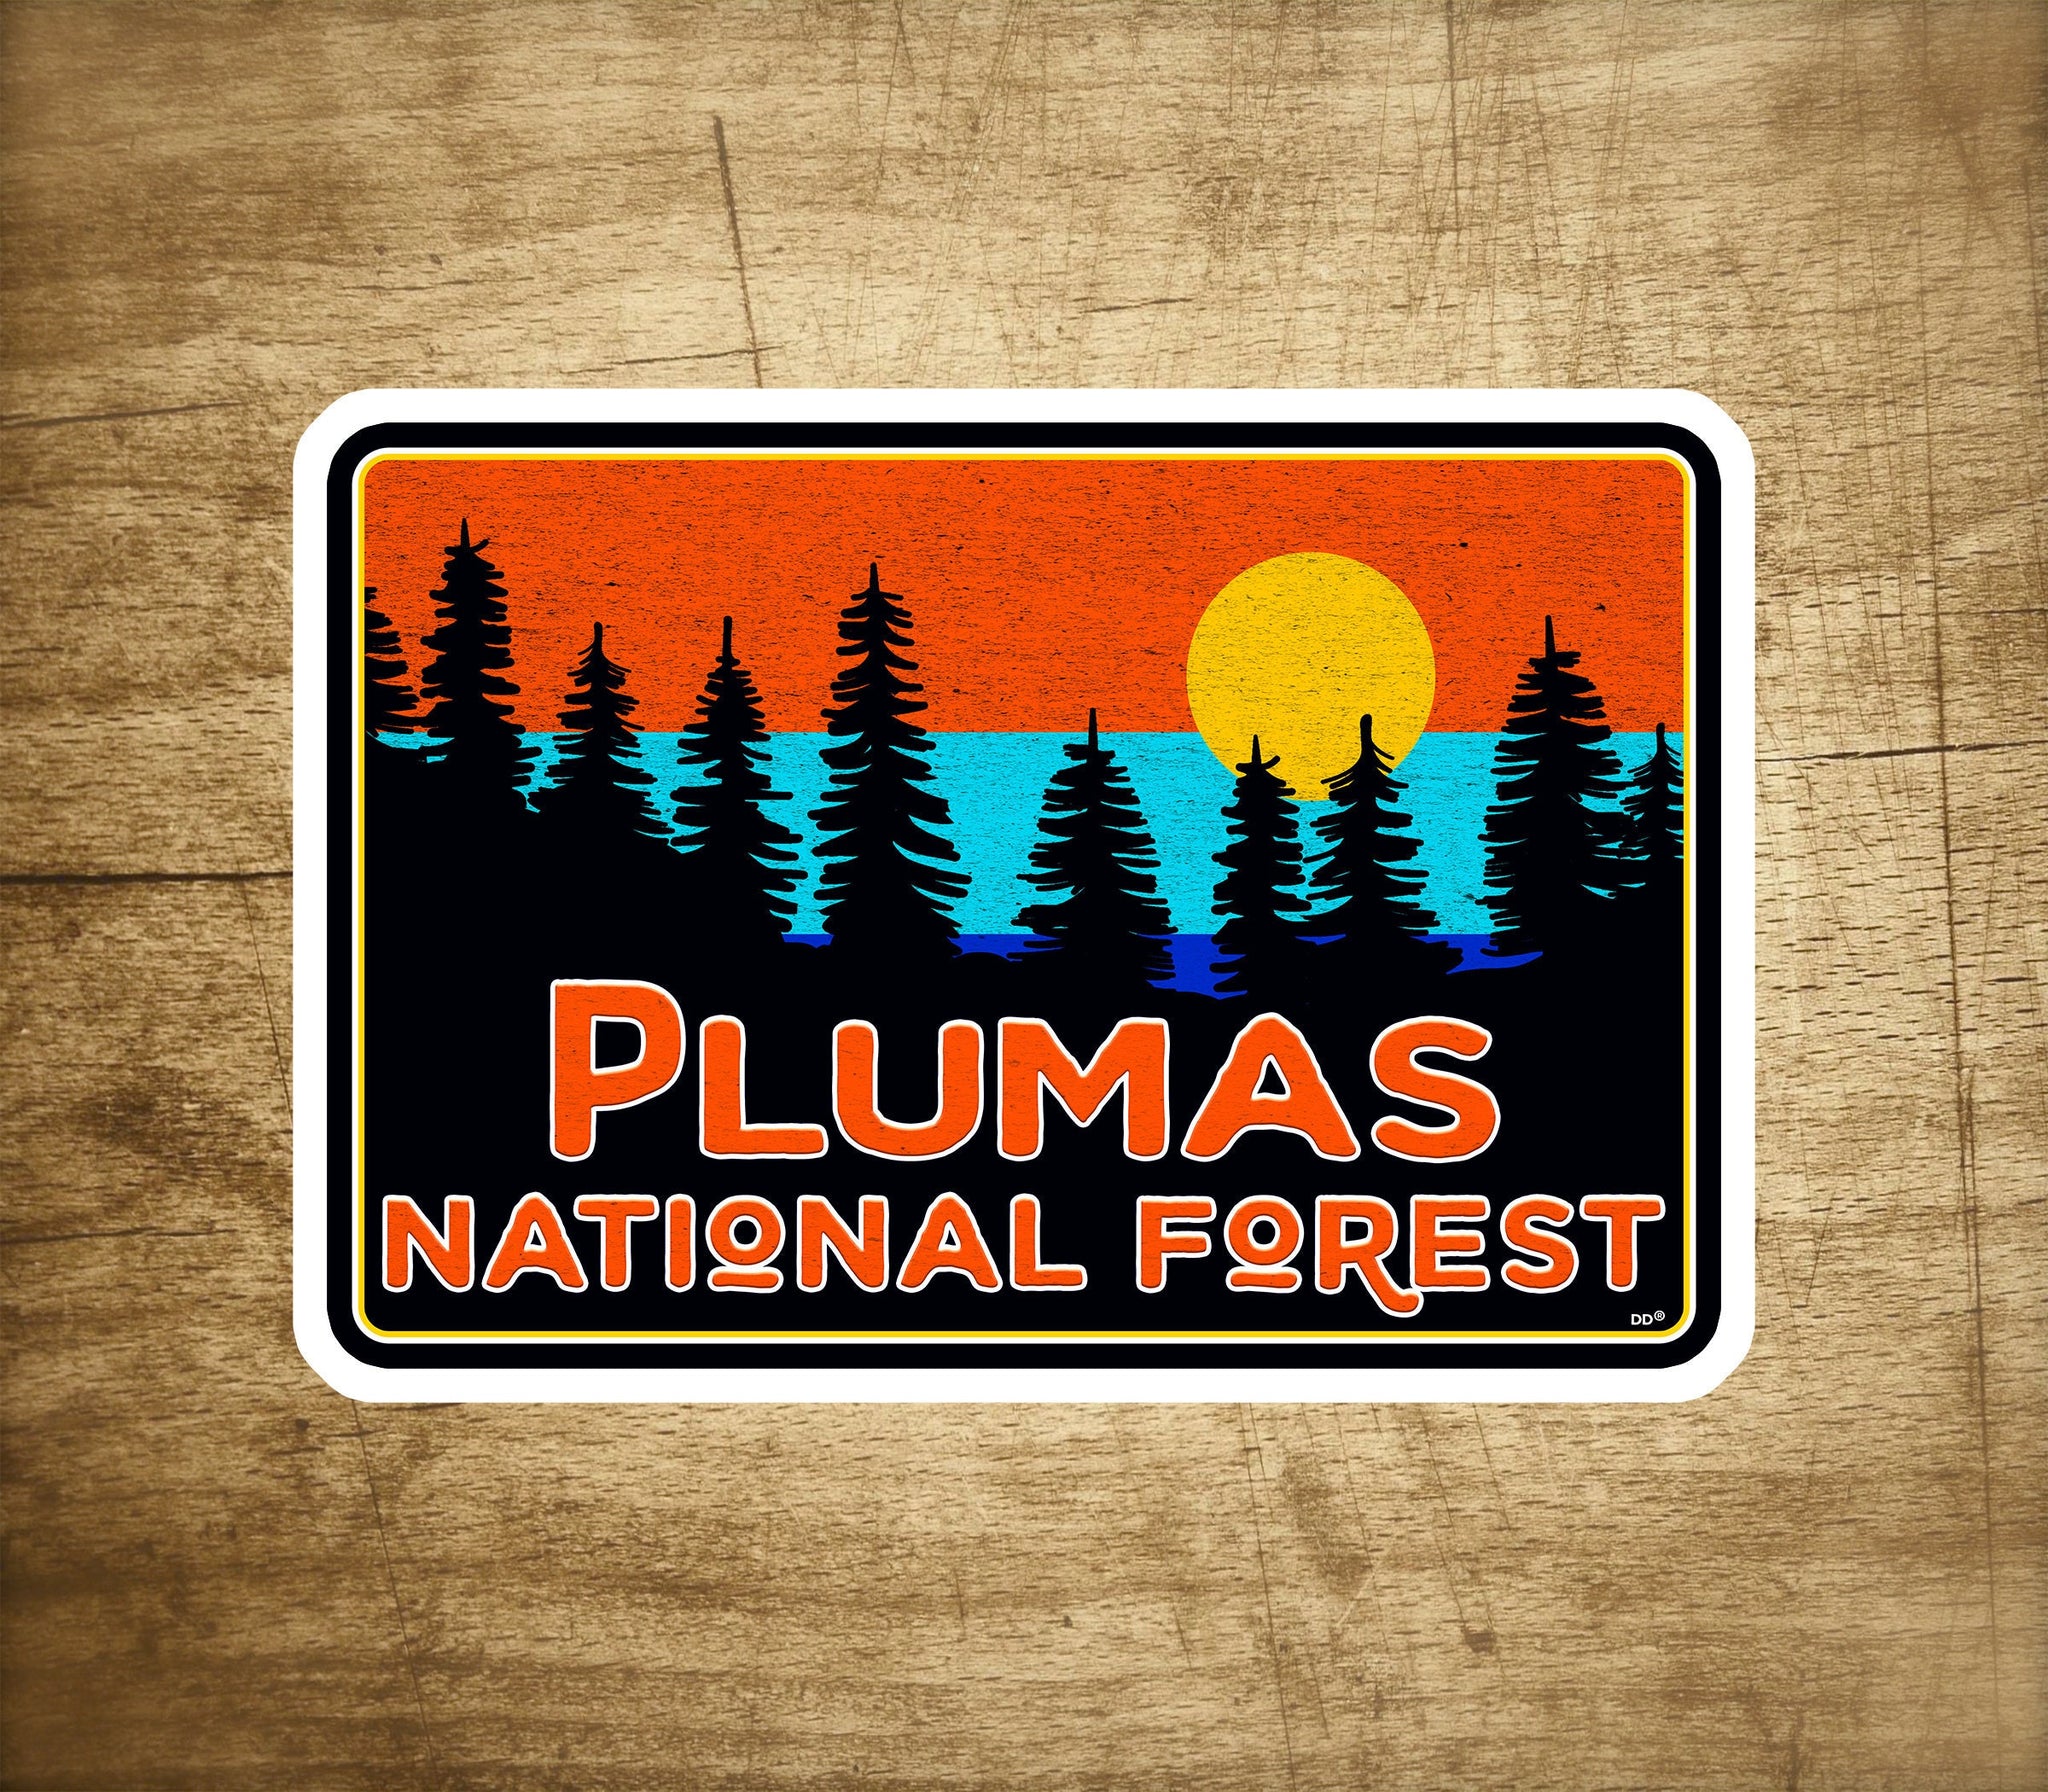 Plumas National Forest Decal Sticker 3.75" x 2.6" California Sign